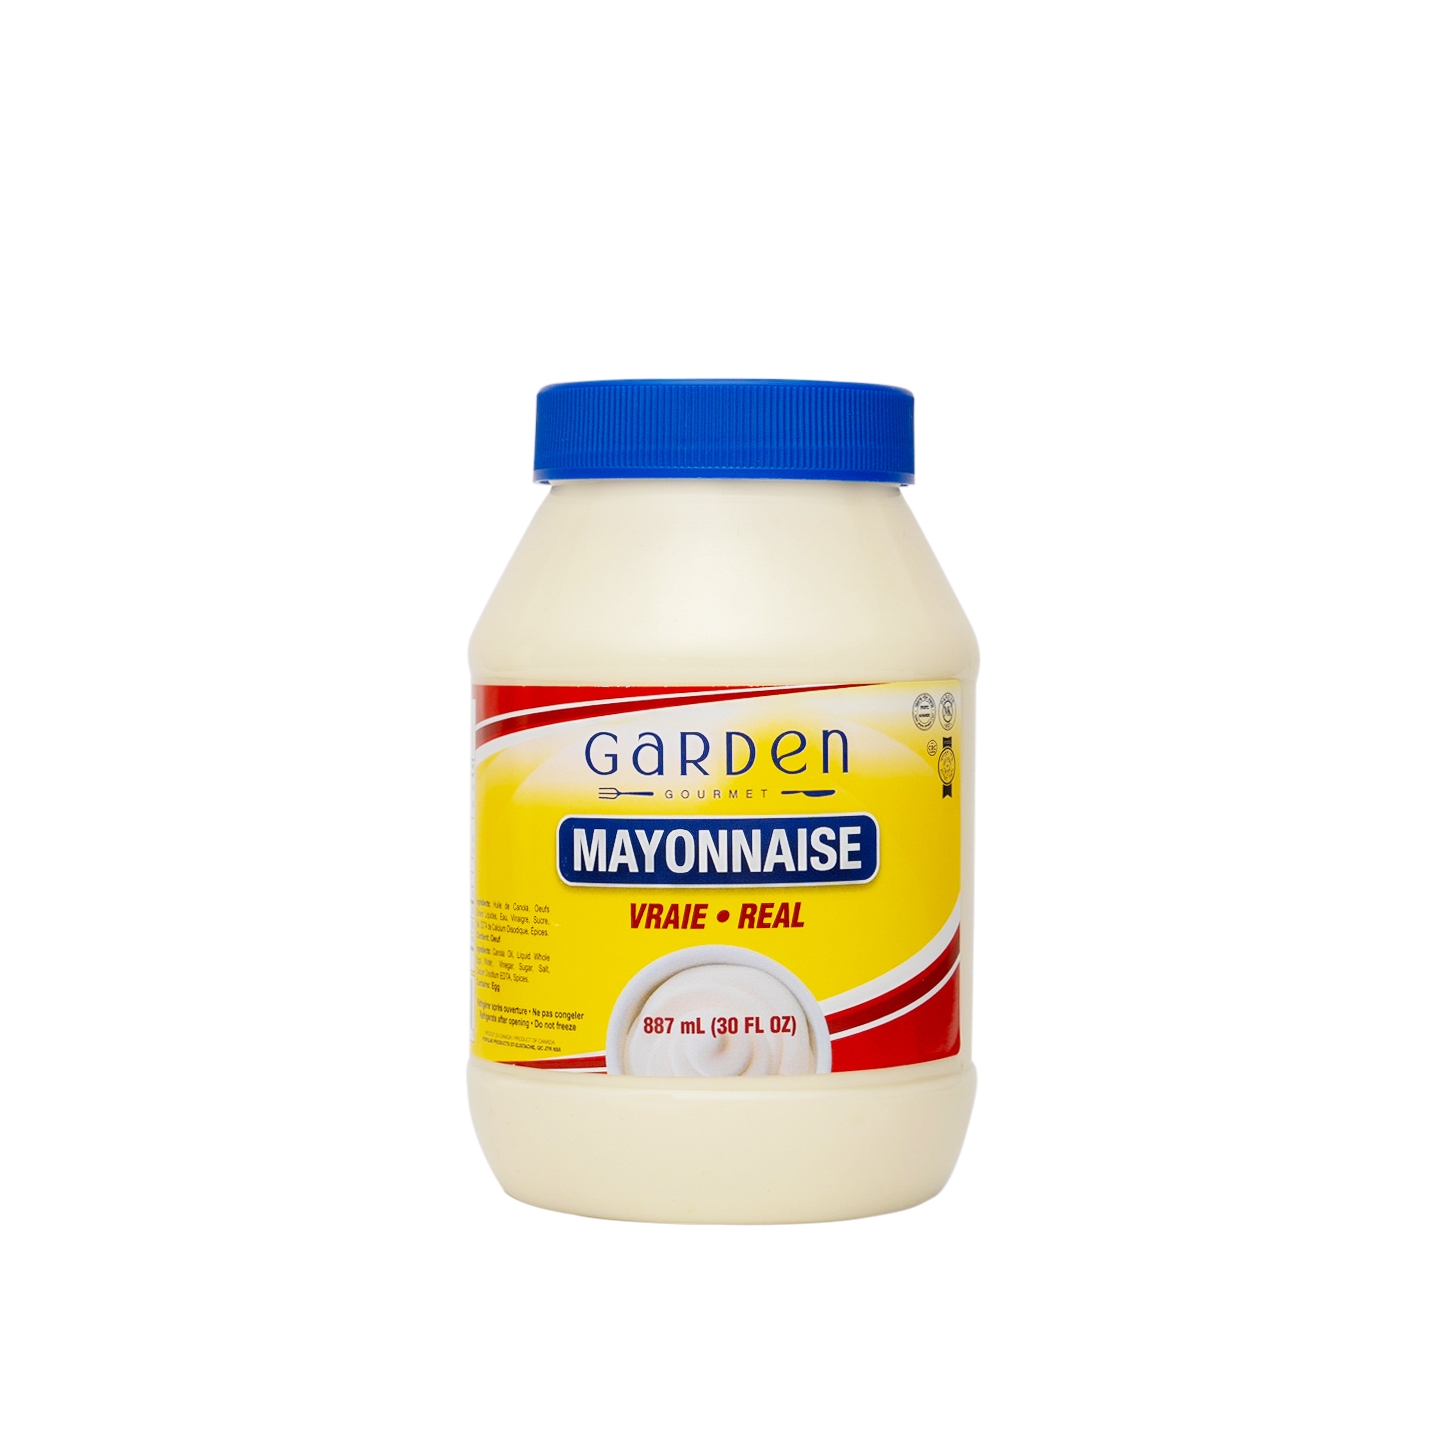 Garden Mayonnaise Vraie Real